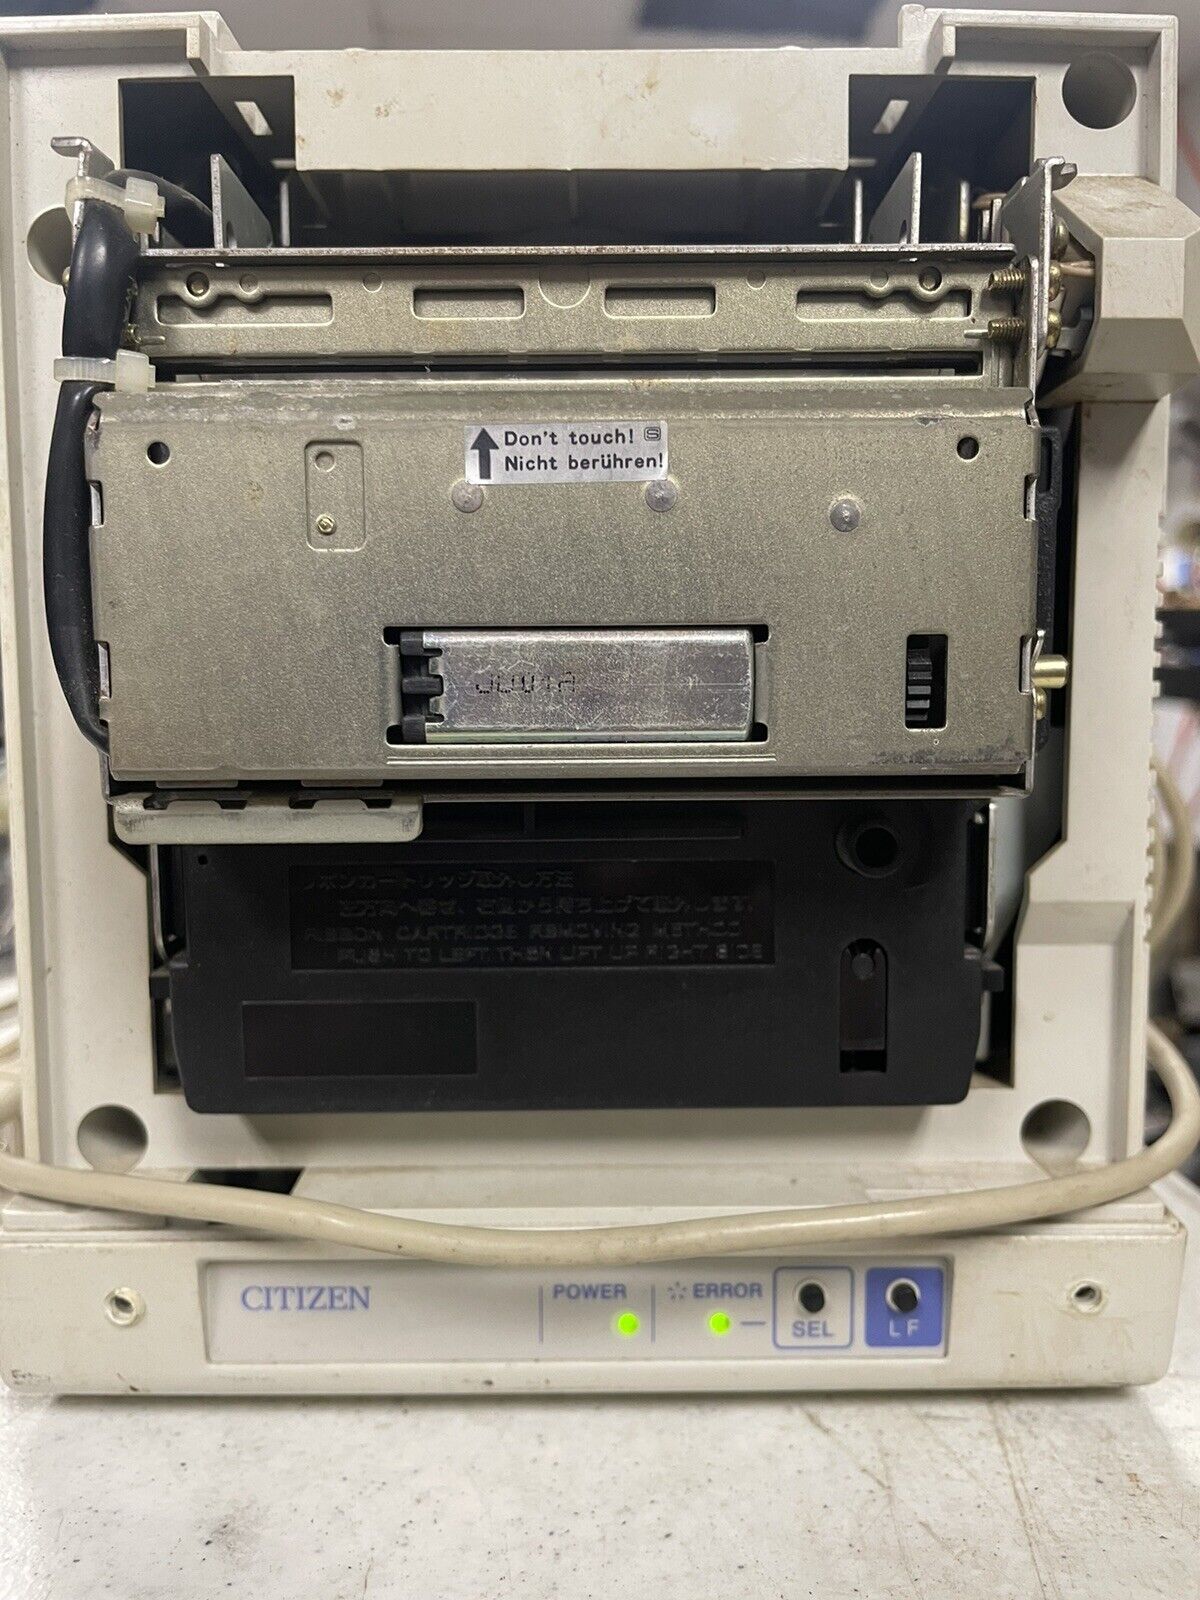 Used Citizen IDP 3551 Printer With Cords